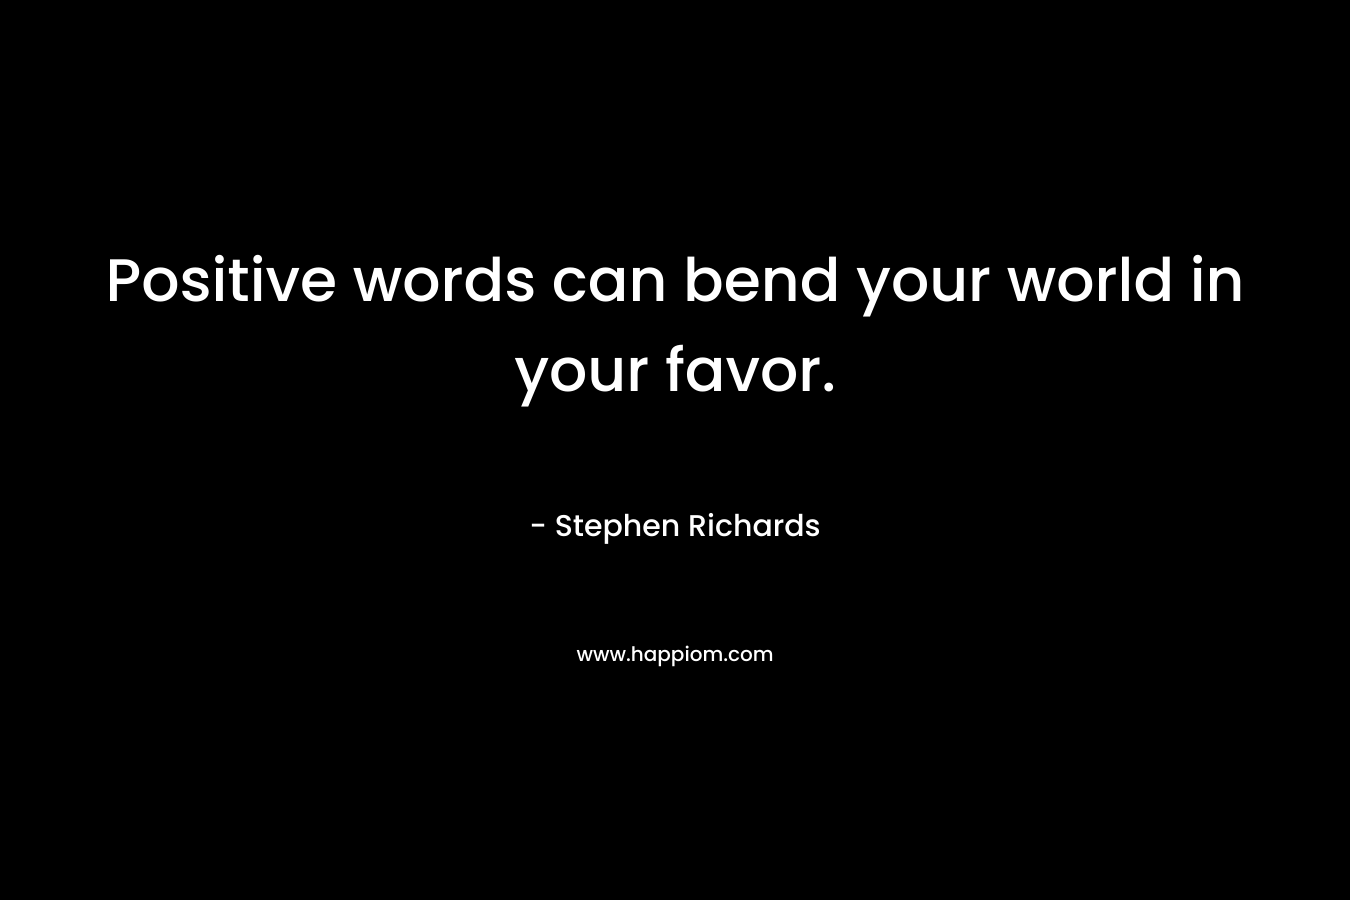 Positive words can bend your world in your favor.